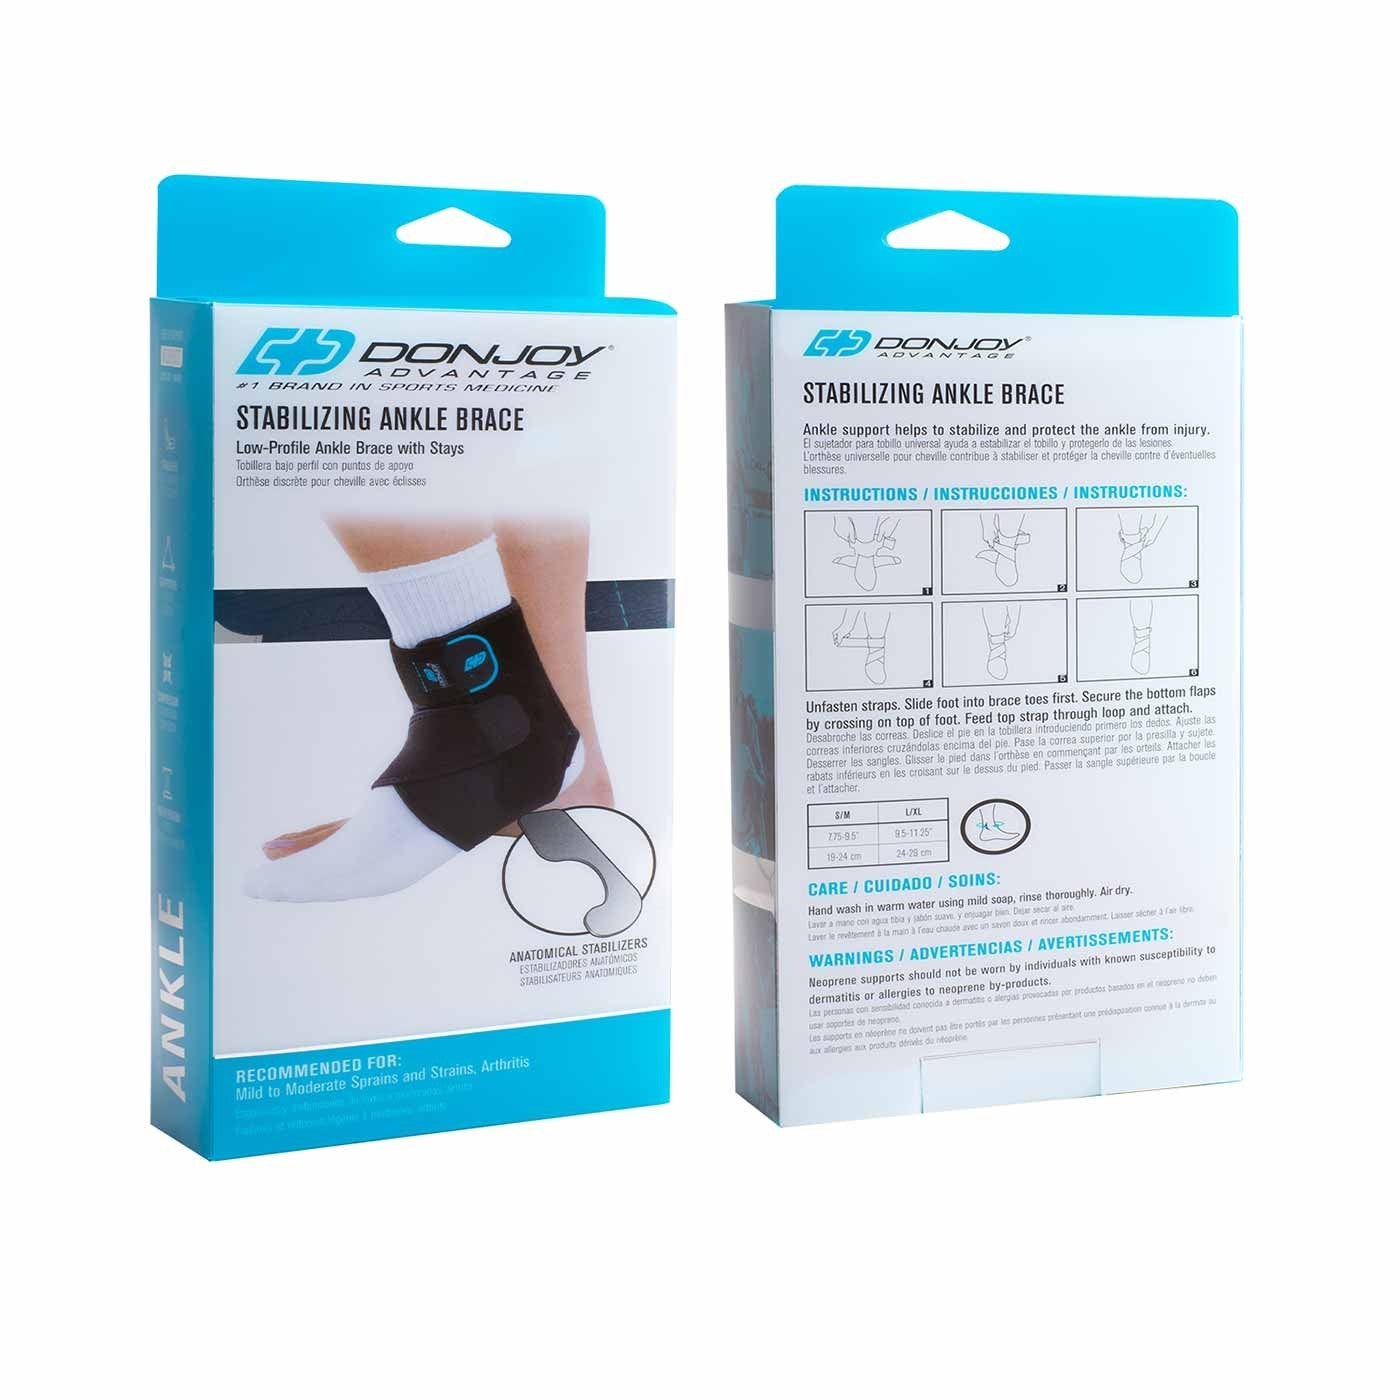 Ankle Support Brace - Low Profile Stabilizer - Vive Health